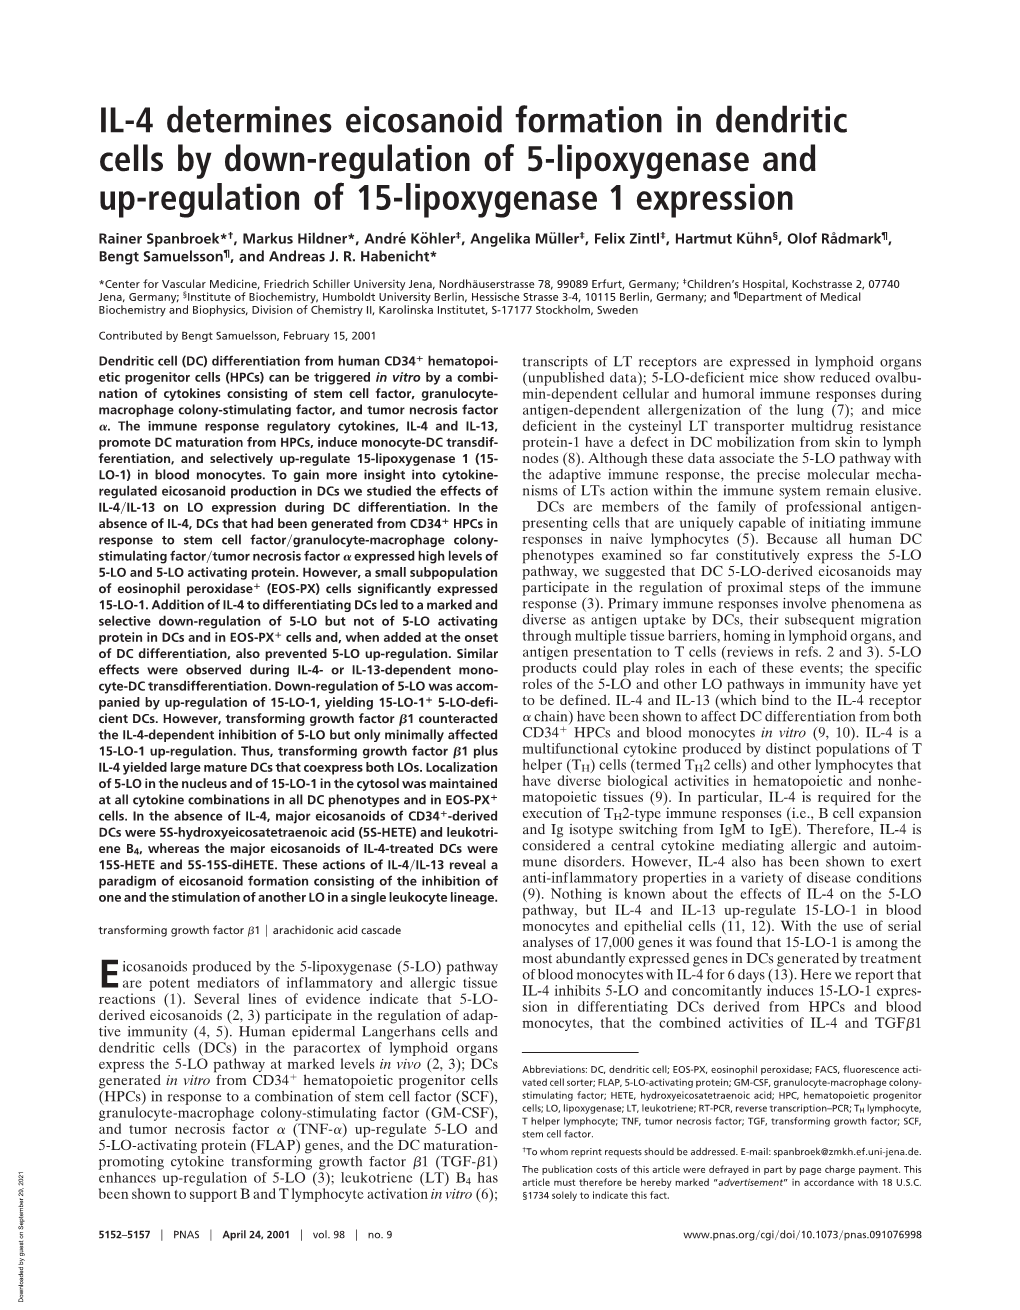 IL-4 Determines Eicosanoid Formation in Dendritic Cells by Down-Regulation of 5-Lipoxygenase and Up-Regulation of 15-Lipoxygenase 1 Expression